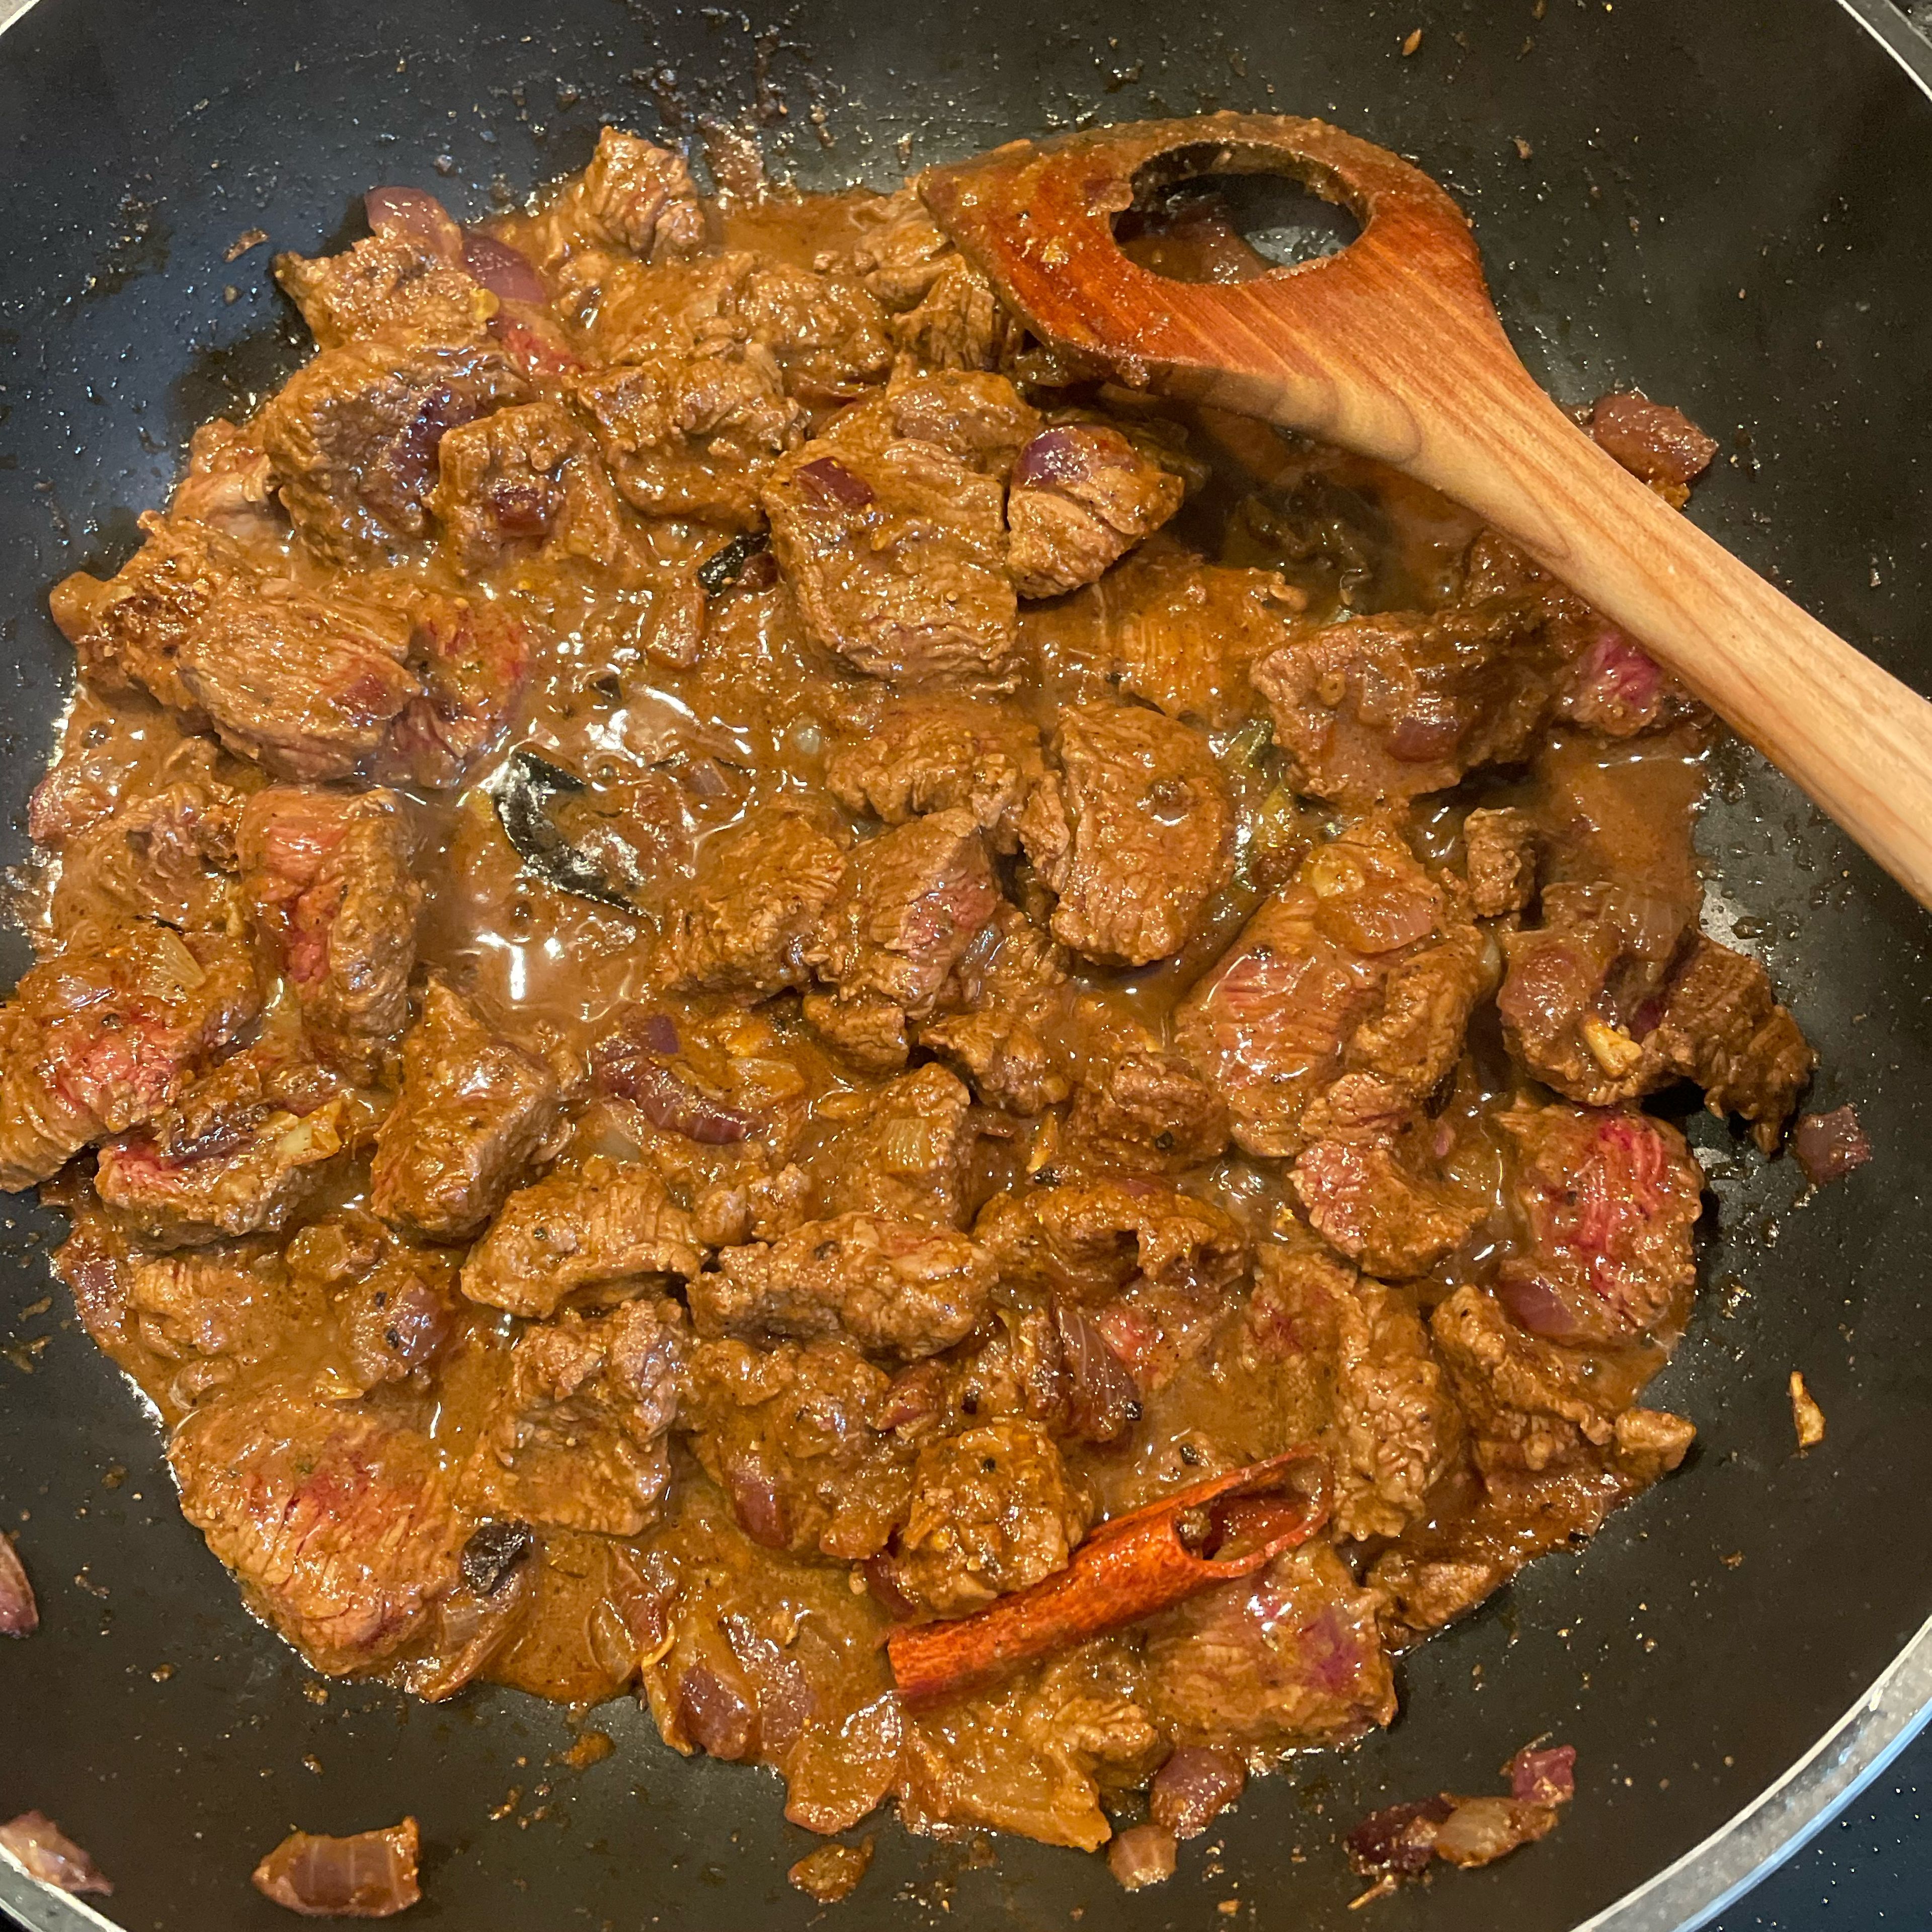 Add beef to the curry base, stir-fry until fully coated and sealed. Then add tamarind juice. Mix with the beef and simmer for 2-3 min on medium heat, then add salt, turmeric and optionally one sliced tomato. Cover and simmer for 20min. Stir occasionally. After 20 min you should have a nice dark base for the curry gravy. While the curry simmers, peel and cube 3 small potatoes.